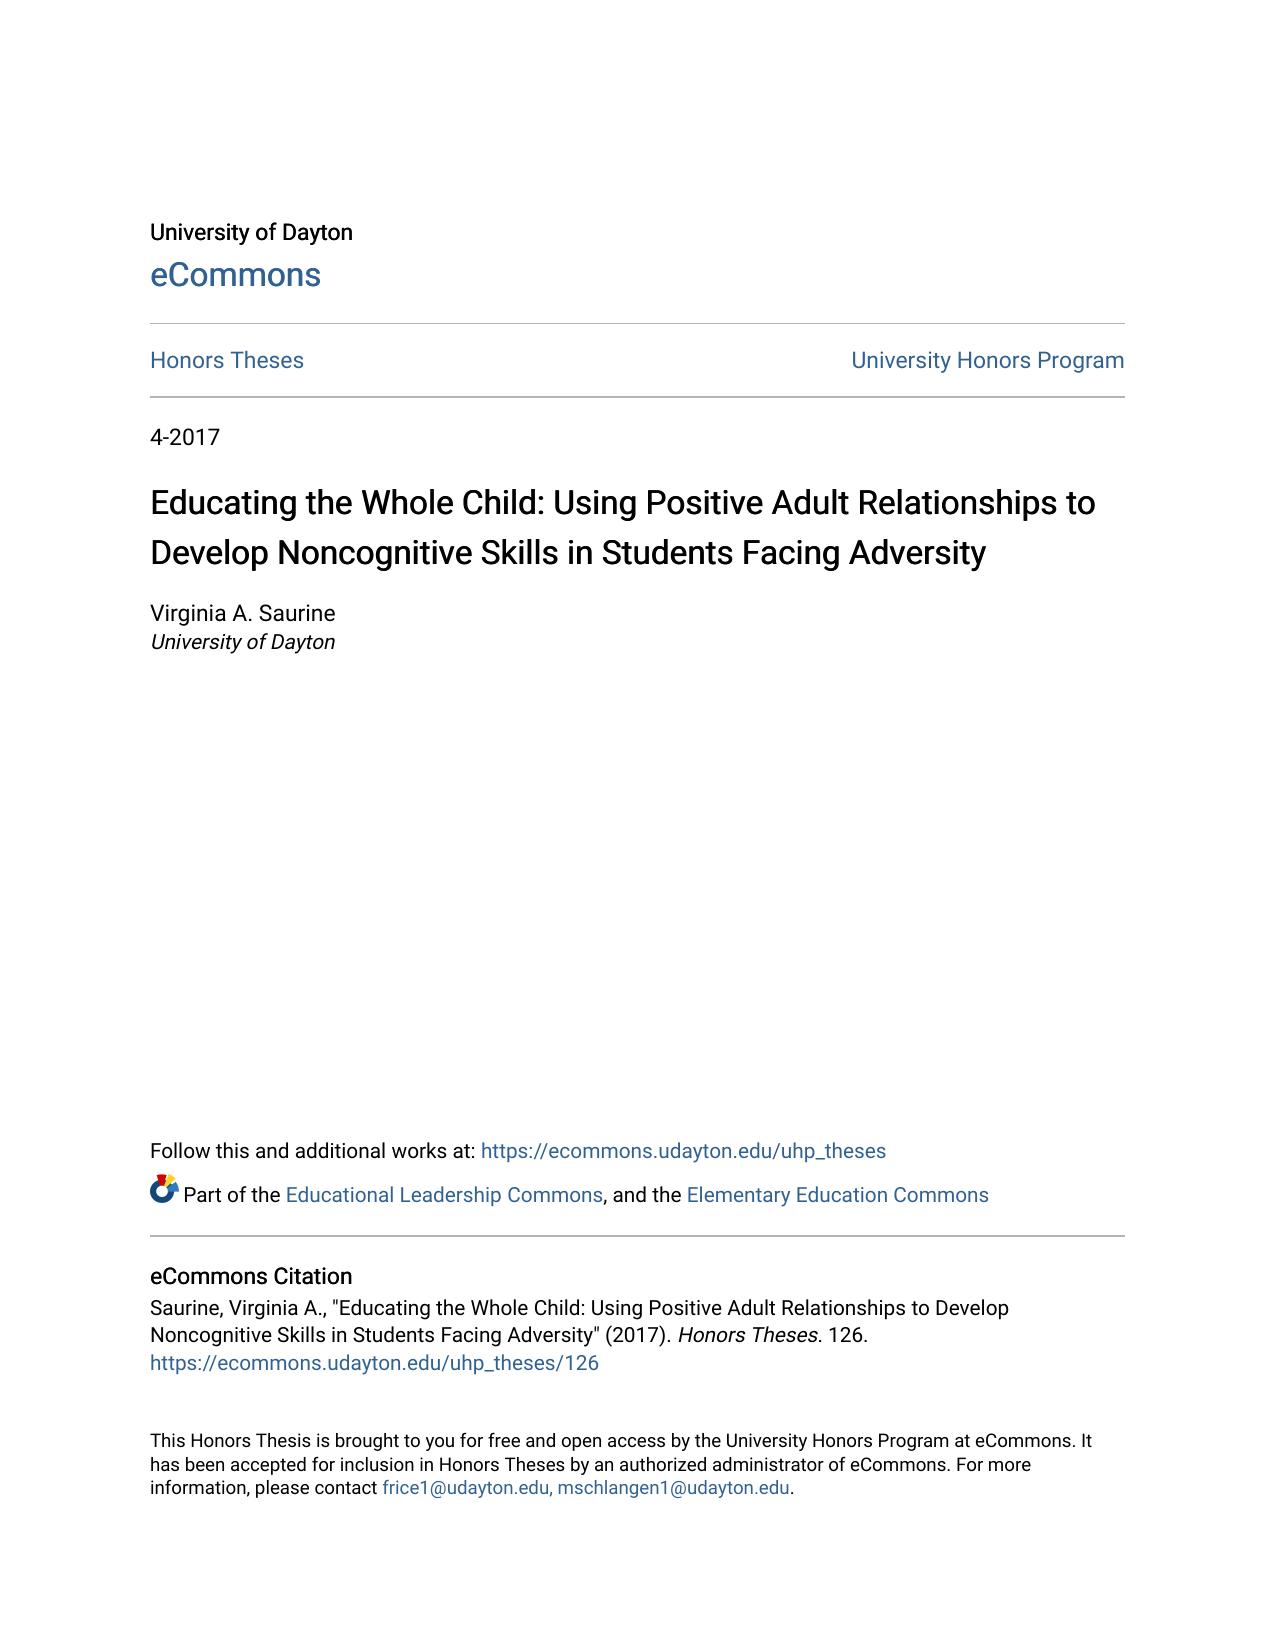 Educating the Whole Child: Using Positive Adult Relationships to Develop Noncognitive Skills in Students Facing Adversity